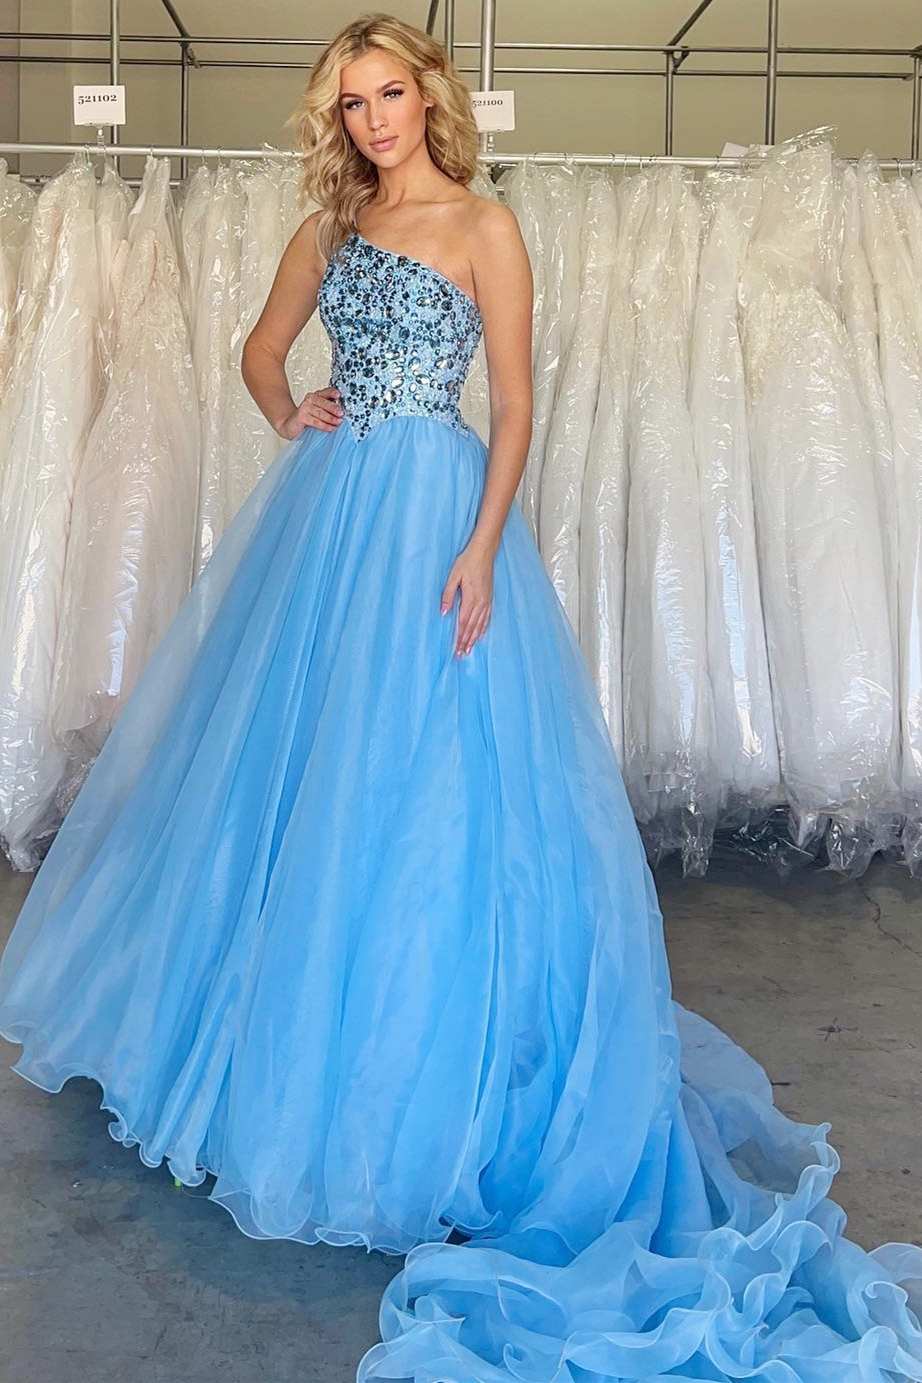 Stunning One-Shoulder Blue A-Line Long Prom Gown